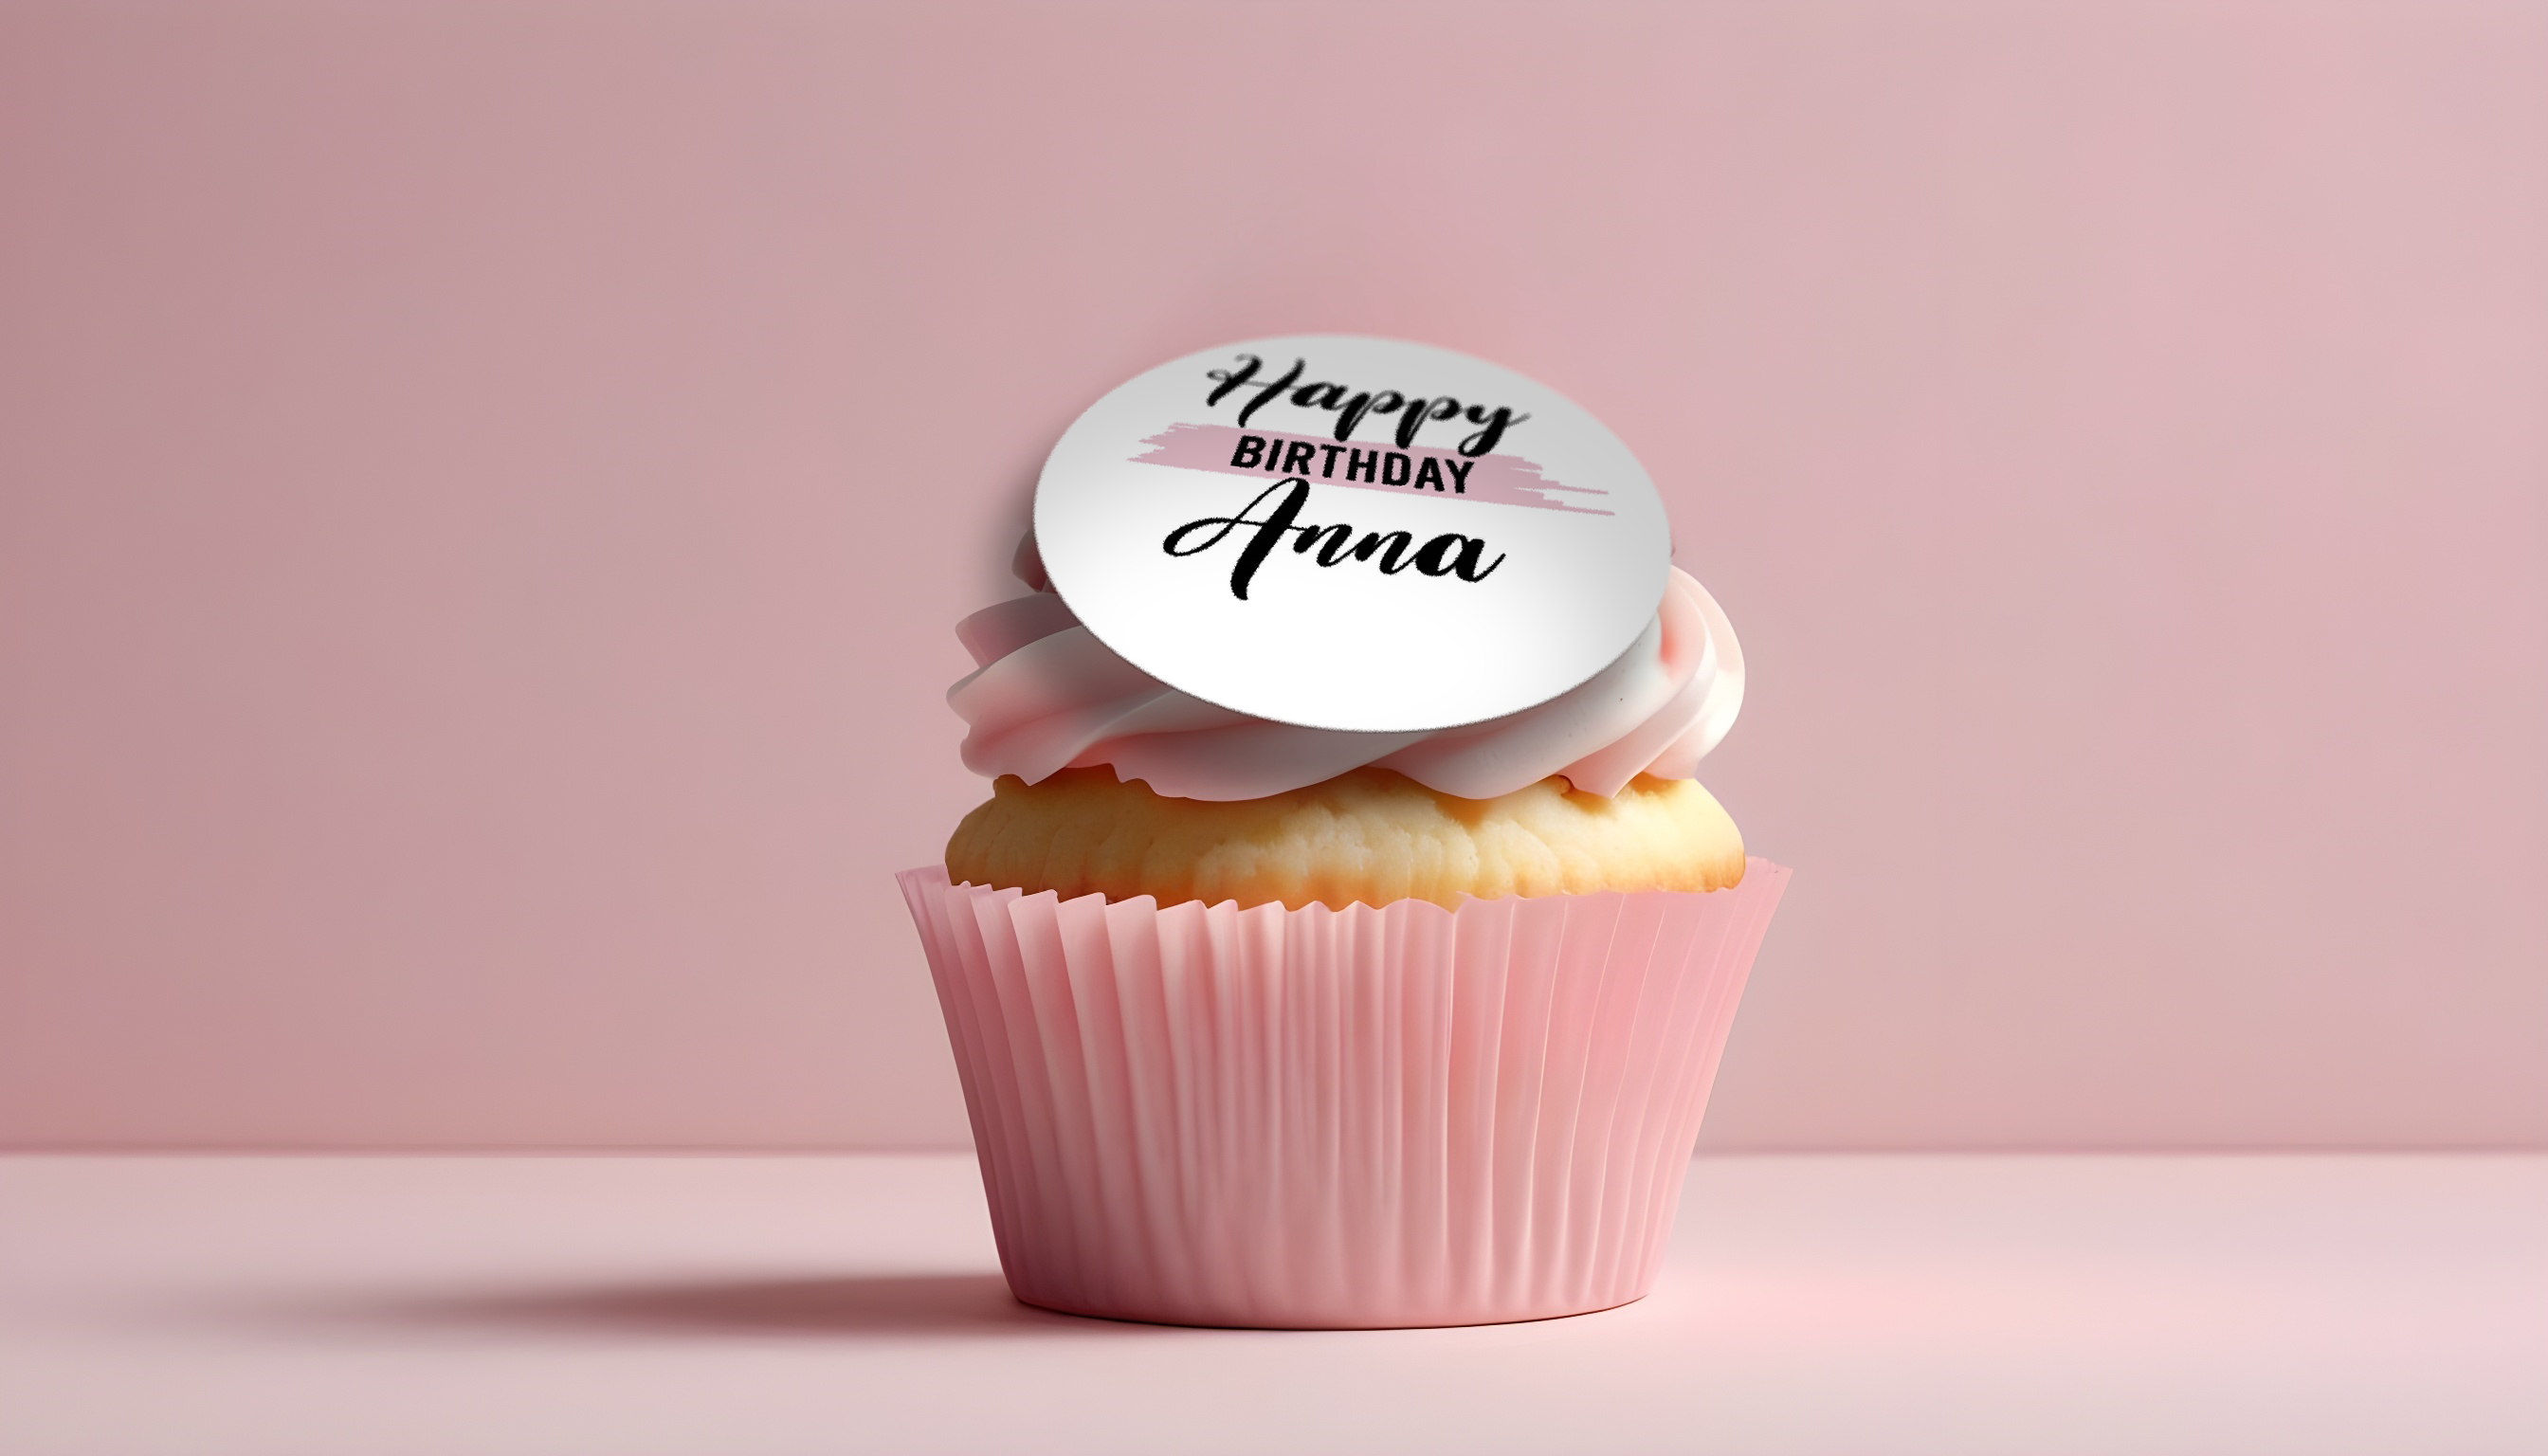 Personalised birthday cupcake with an edible cupcake toppers and birthday message